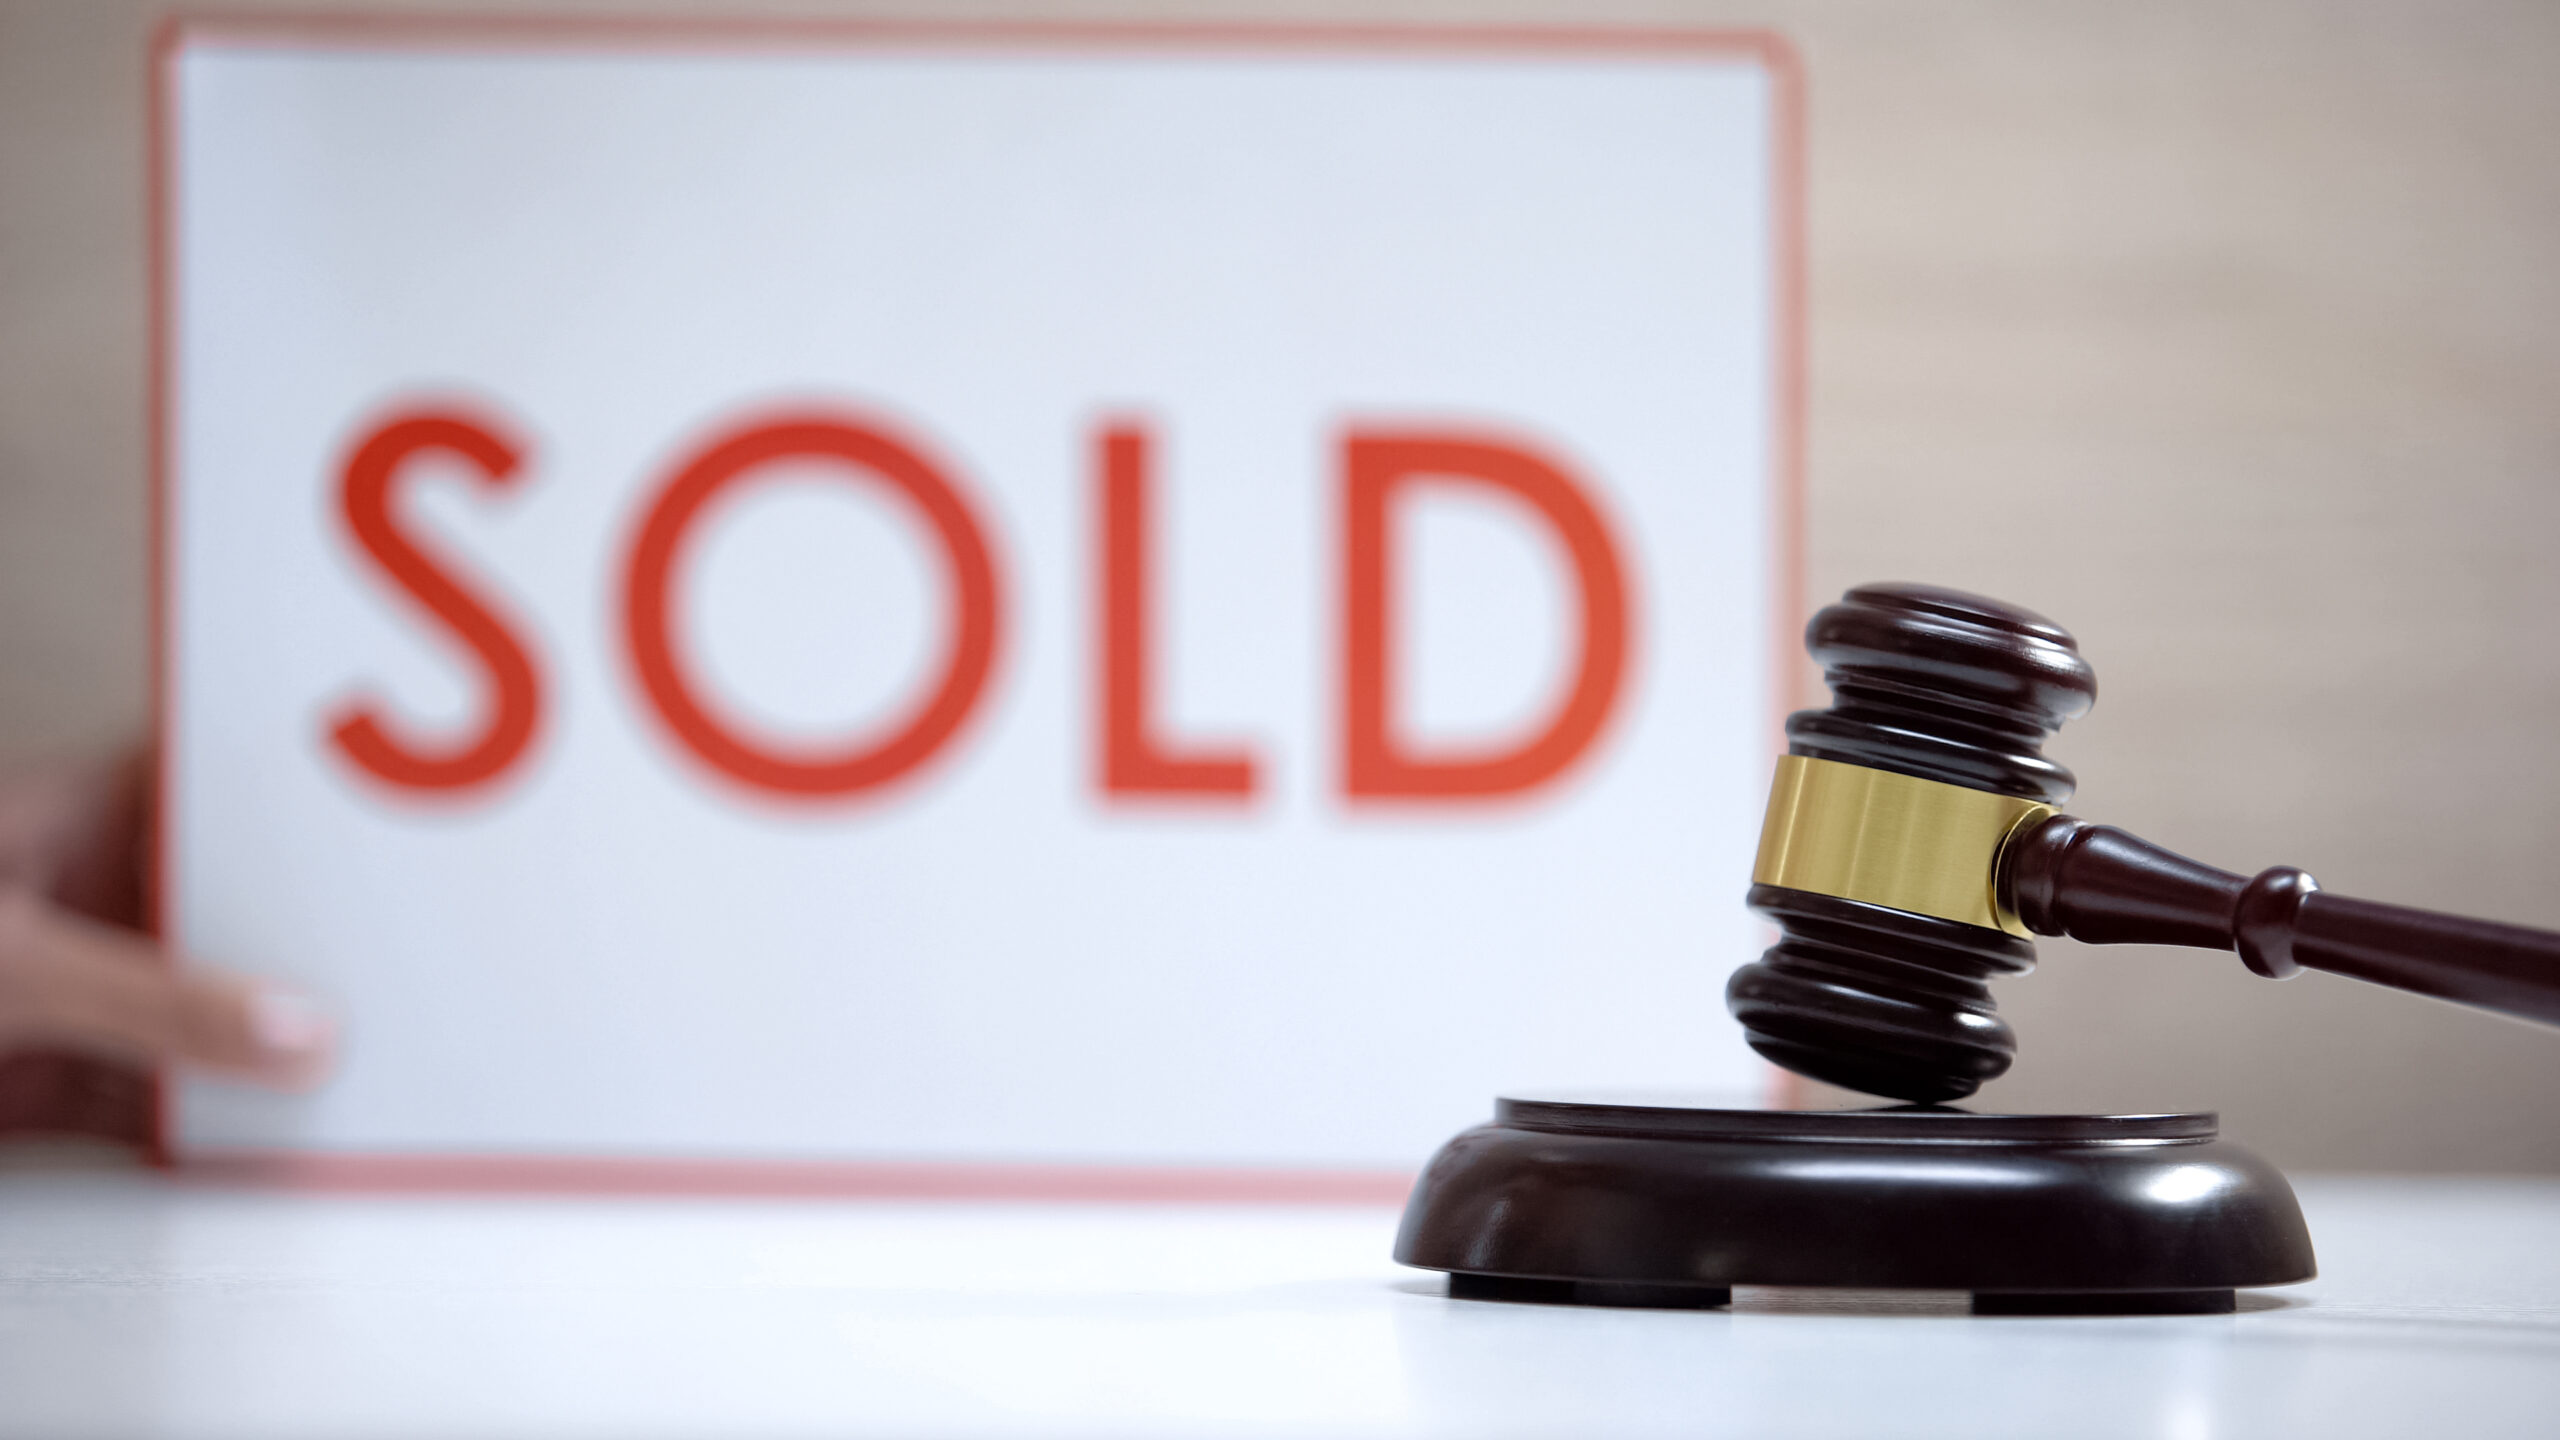 Gavel standing sound block against sold sign background, court decision, auction